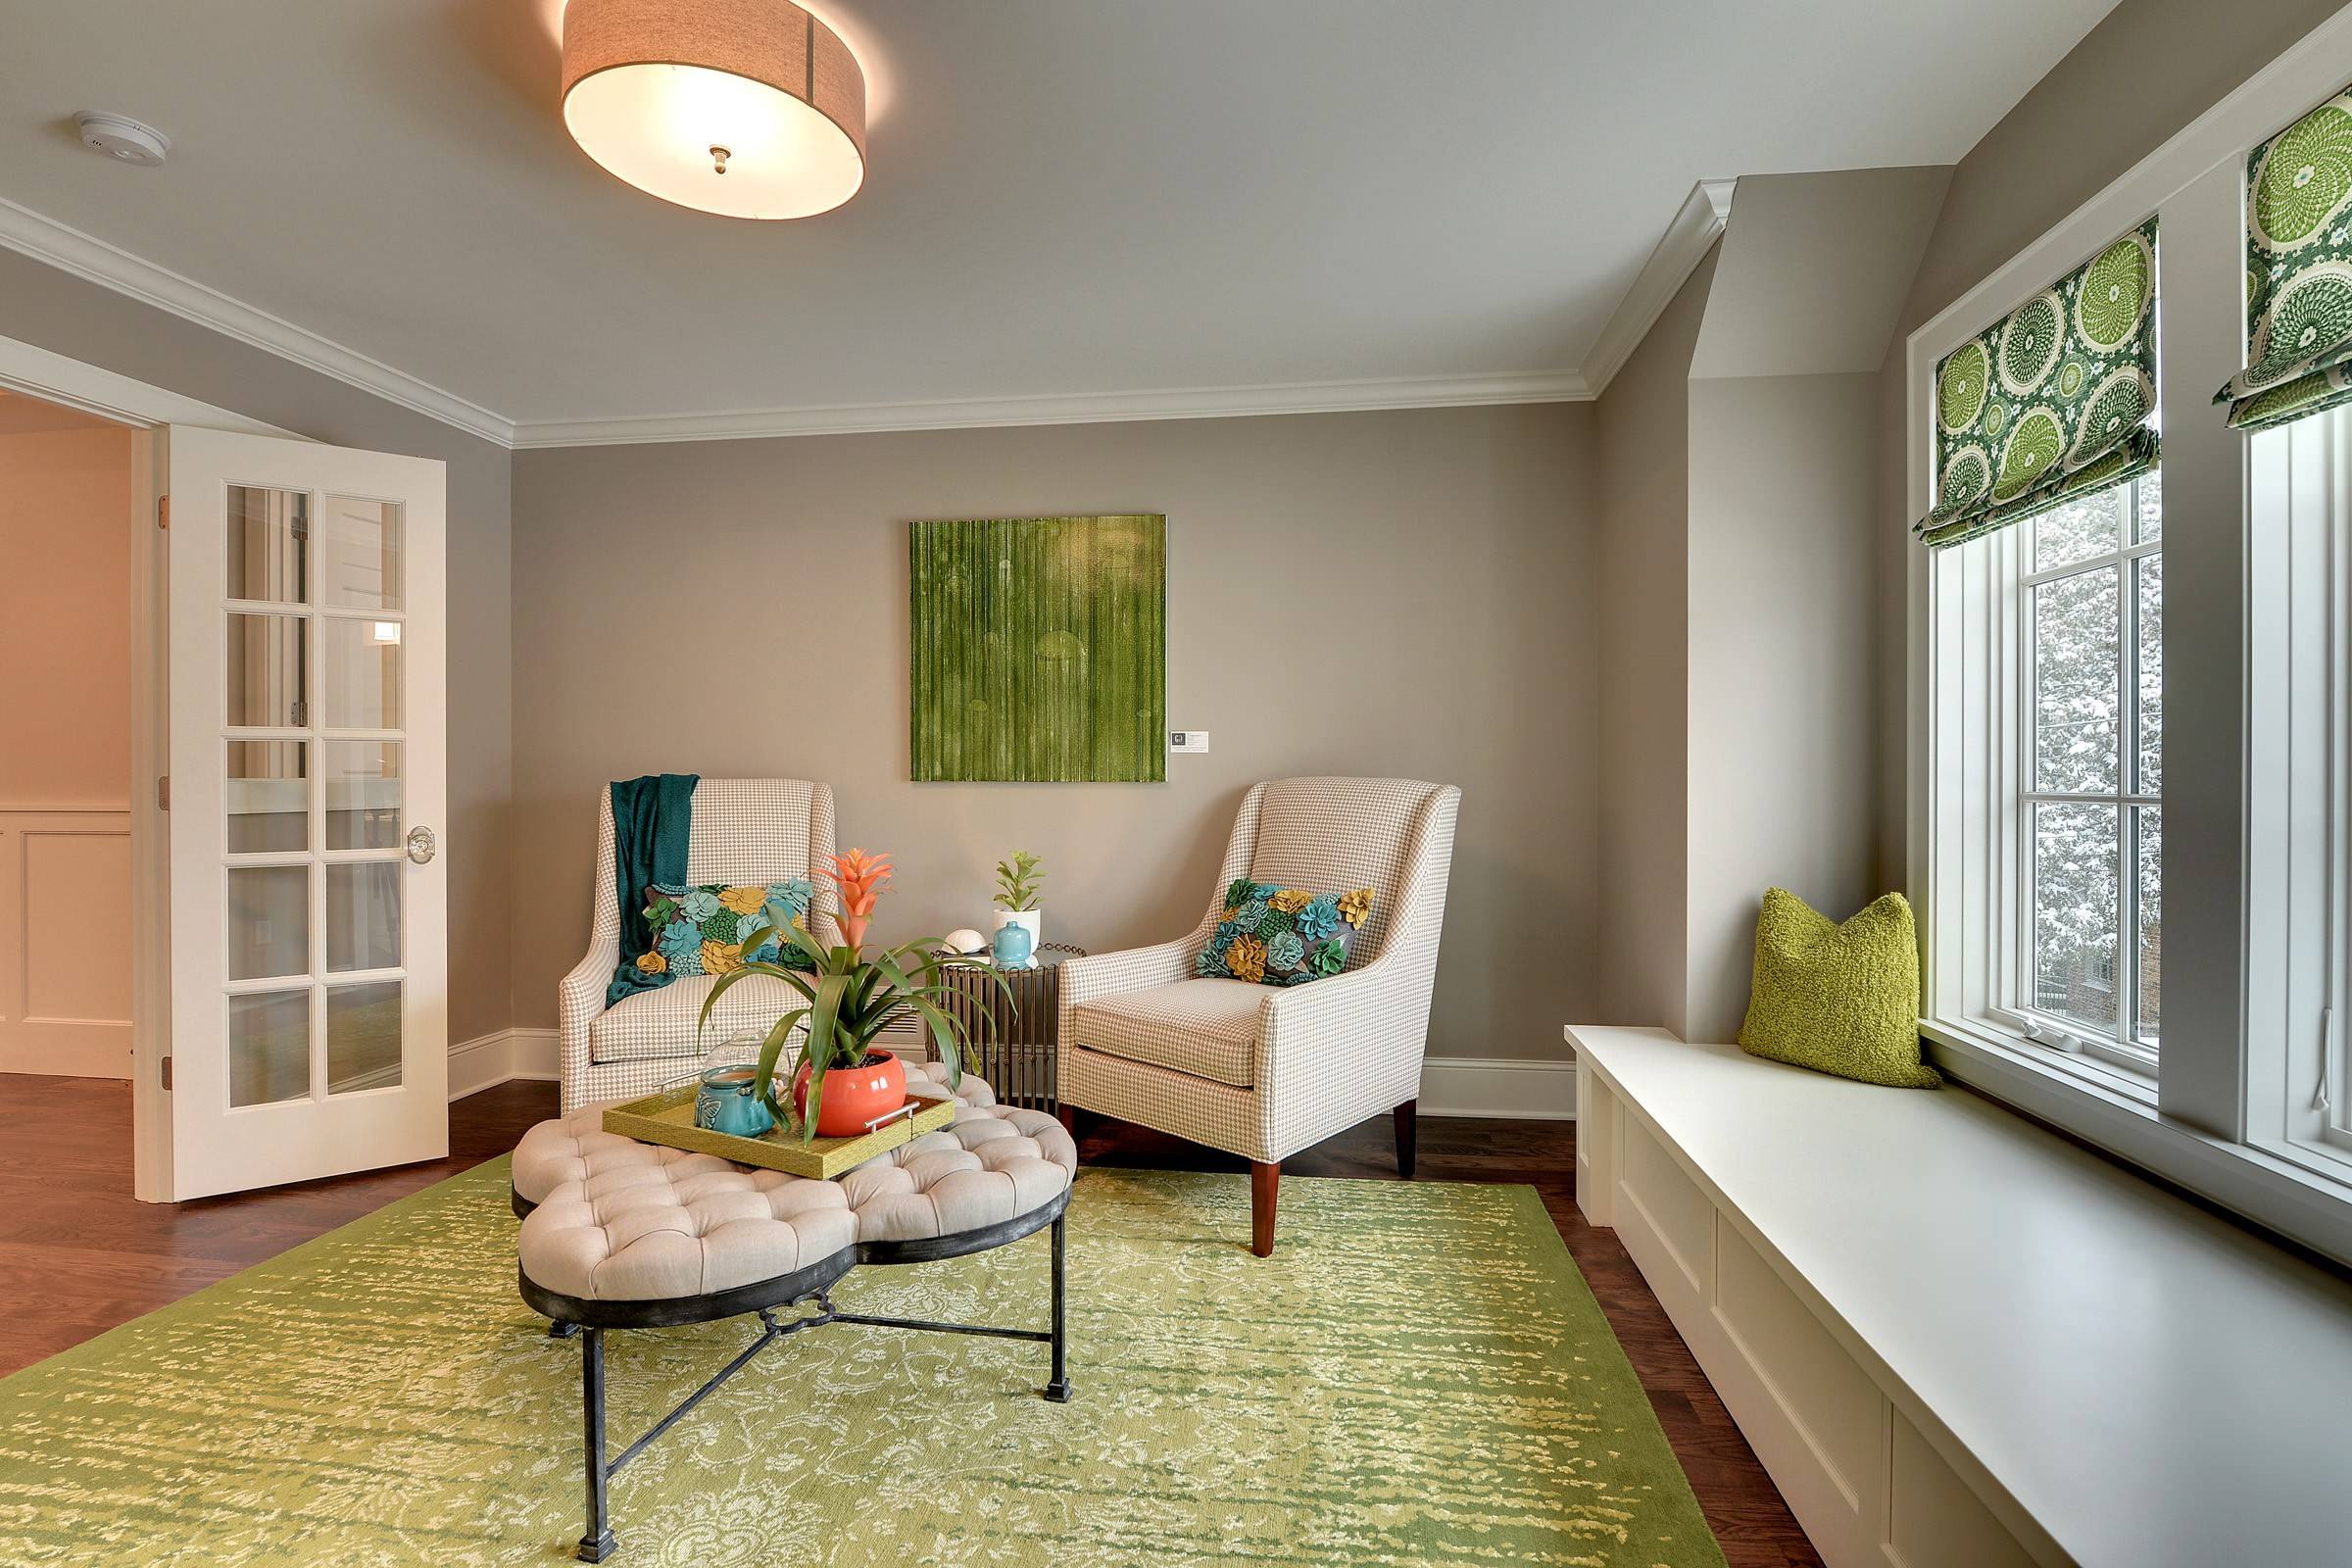 Lime detail for a pop of color (from Houzz)